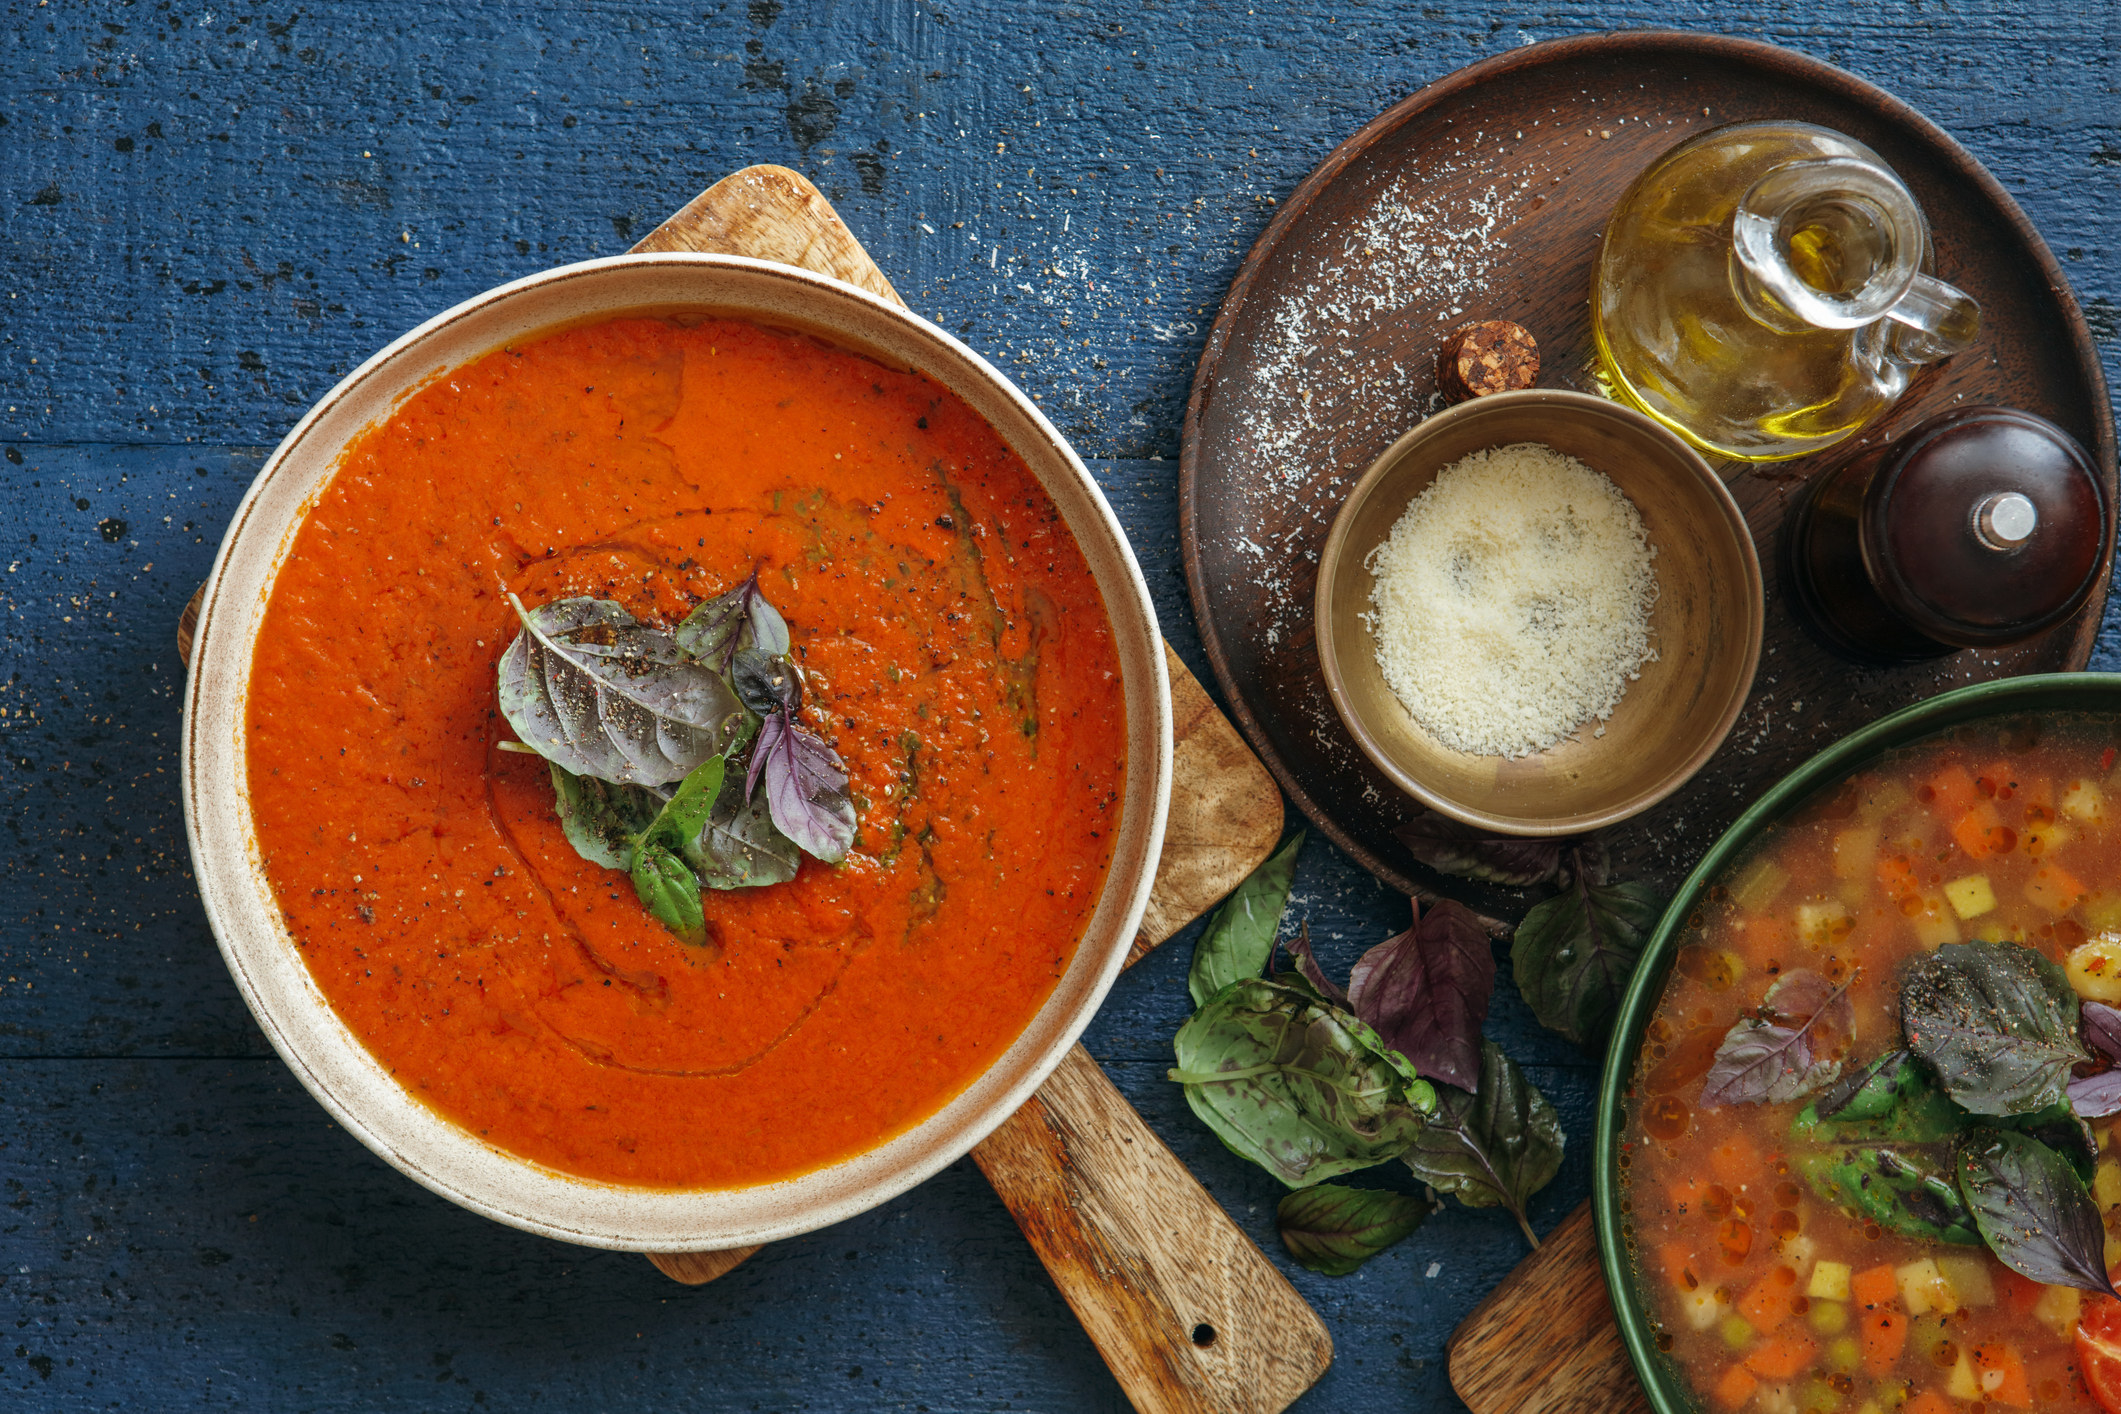 Italian soups with olive oil and cheese on the side